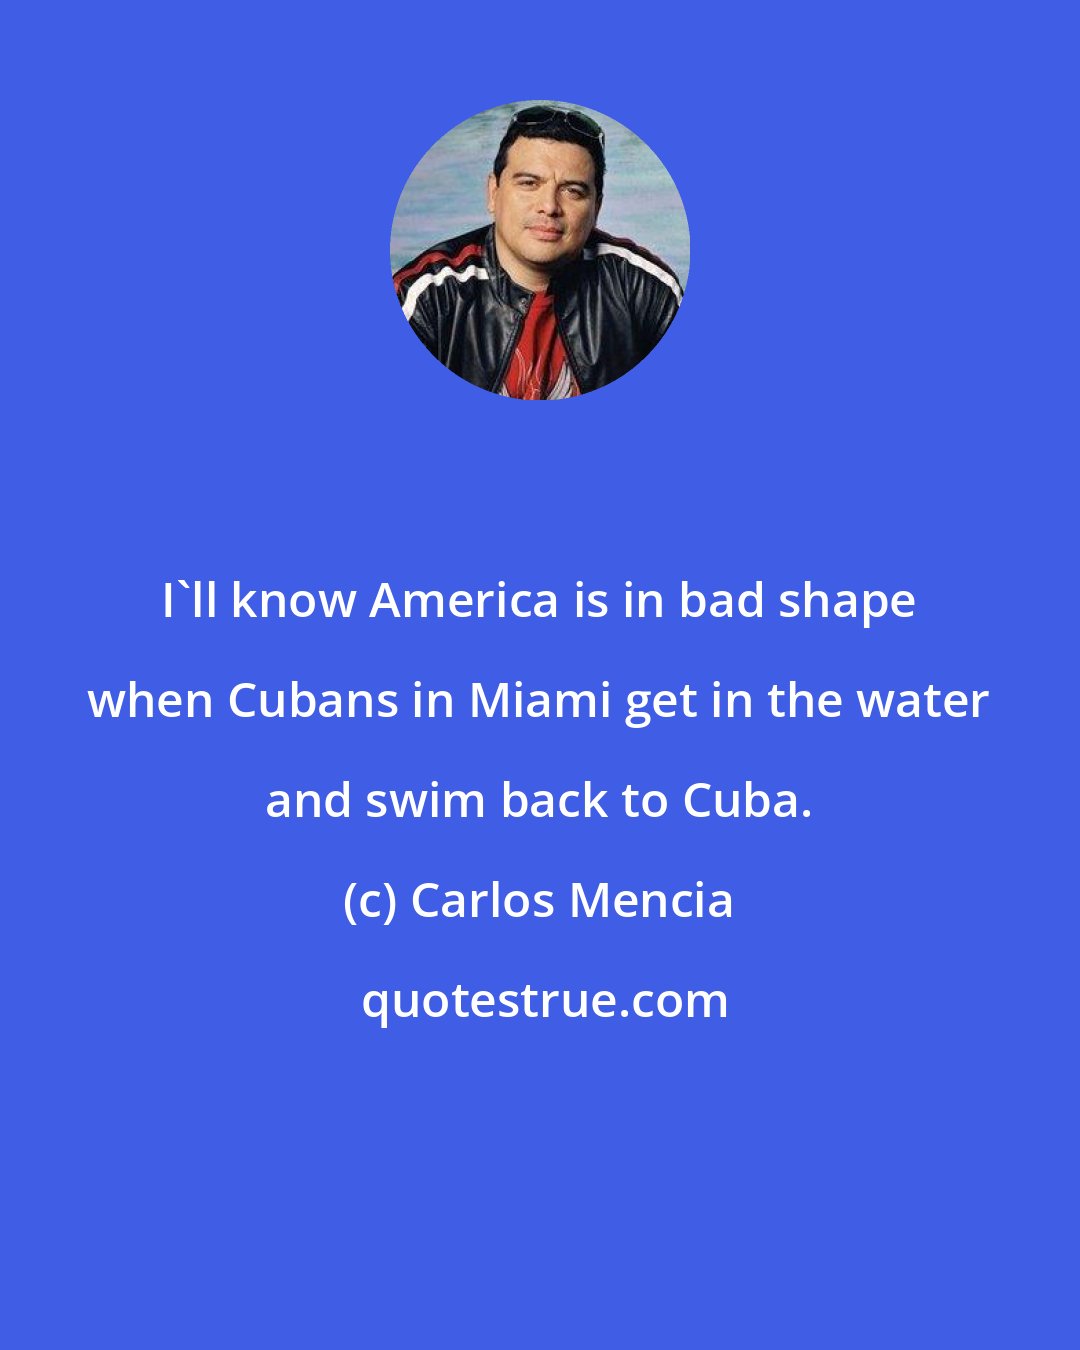 Carlos Mencia: I'll know America is in bad shape when Cubans in Miami get in the water and swim back to Cuba.